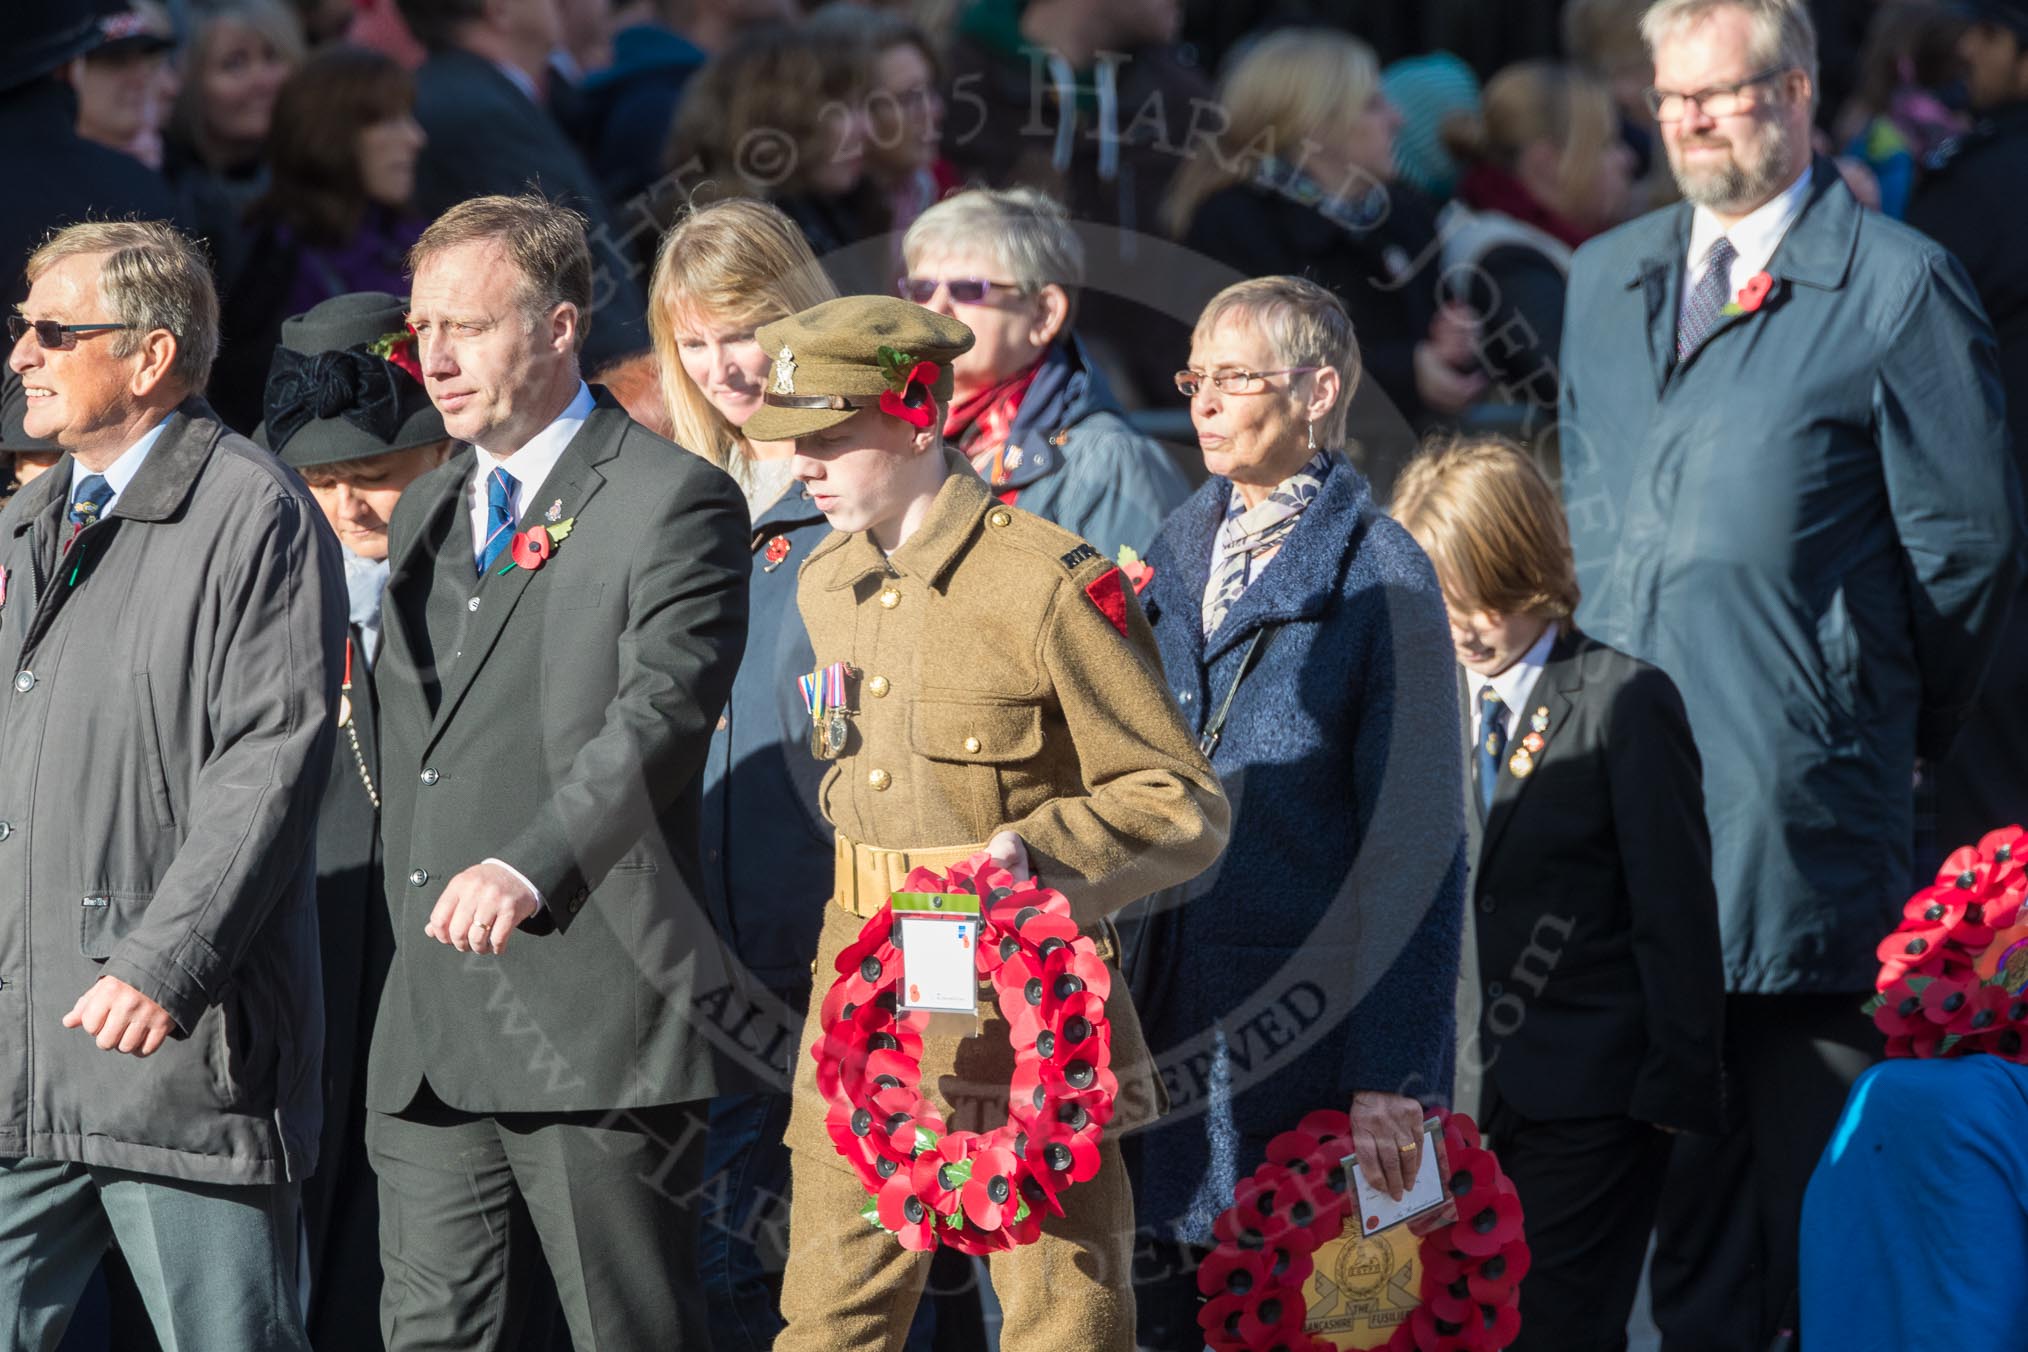 March Past, Remembrance Sunday at the Cenotaph 2016: M22 The Royal British Legion - Civilians.
Cenotaph, Whitehall, London SW1,
London,
Greater London,
United Kingdom,
on 13 November 2016 at 13:16, image #2673